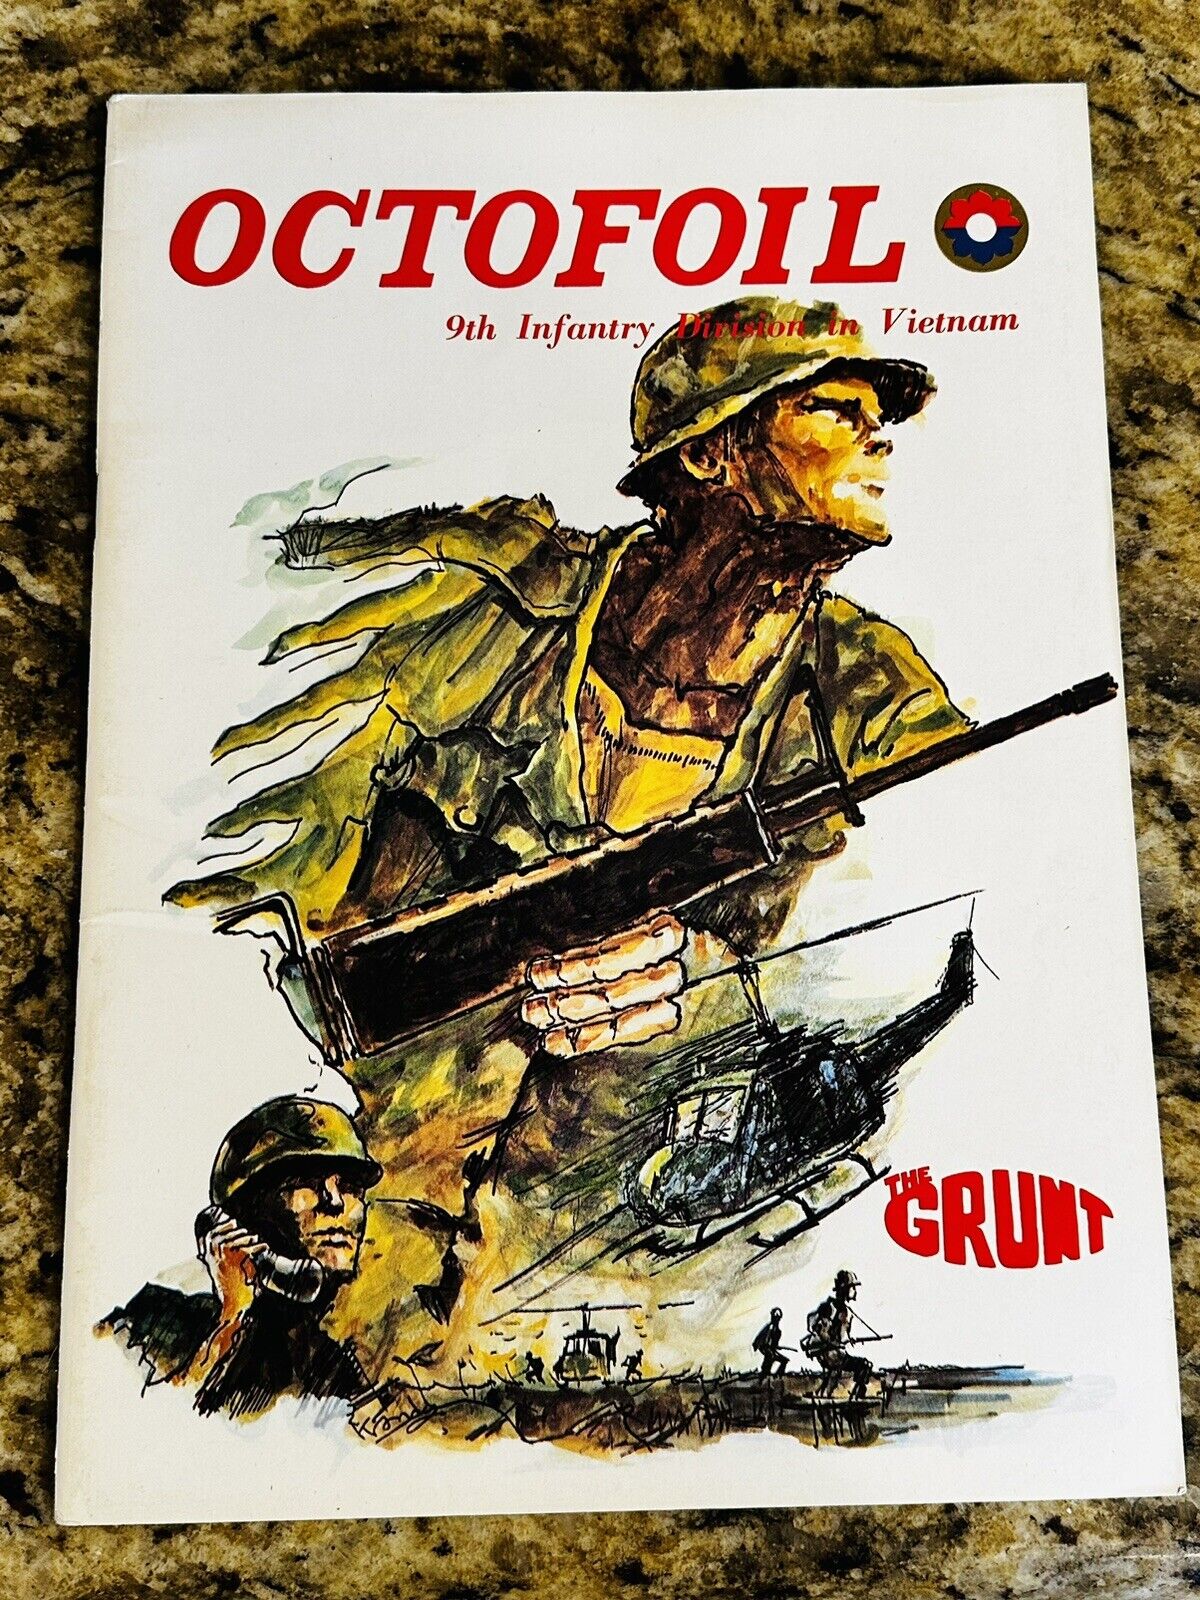 “Octofoil” 1970 magazine Vol 2 April, May, June No. 2 9th Infantry Division